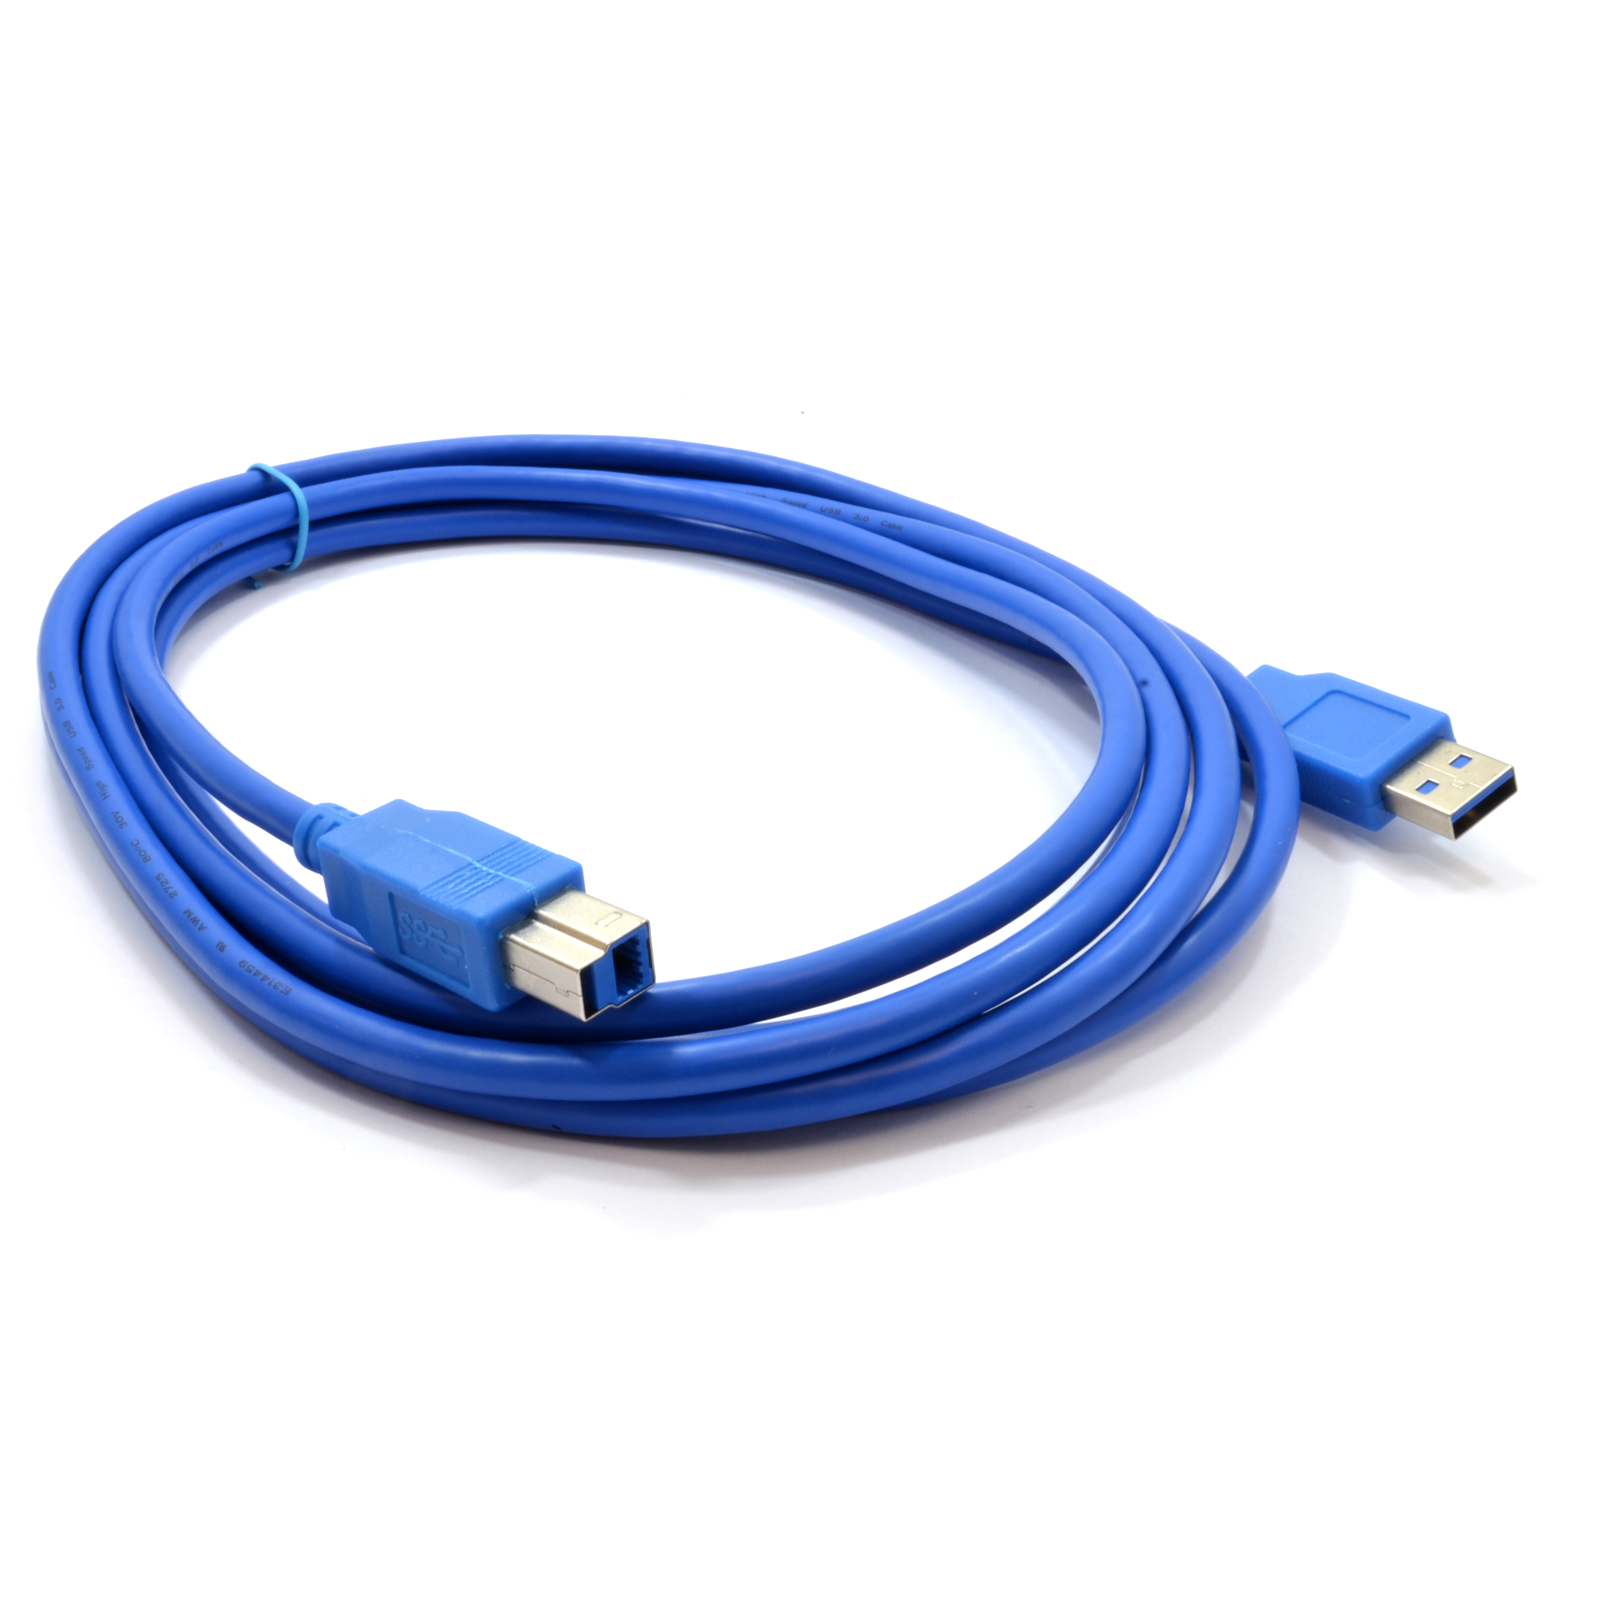 USB 3.0 SuperSpeed Cable Type Plug A to Type B Plug BLUE 3m - USB3 ...